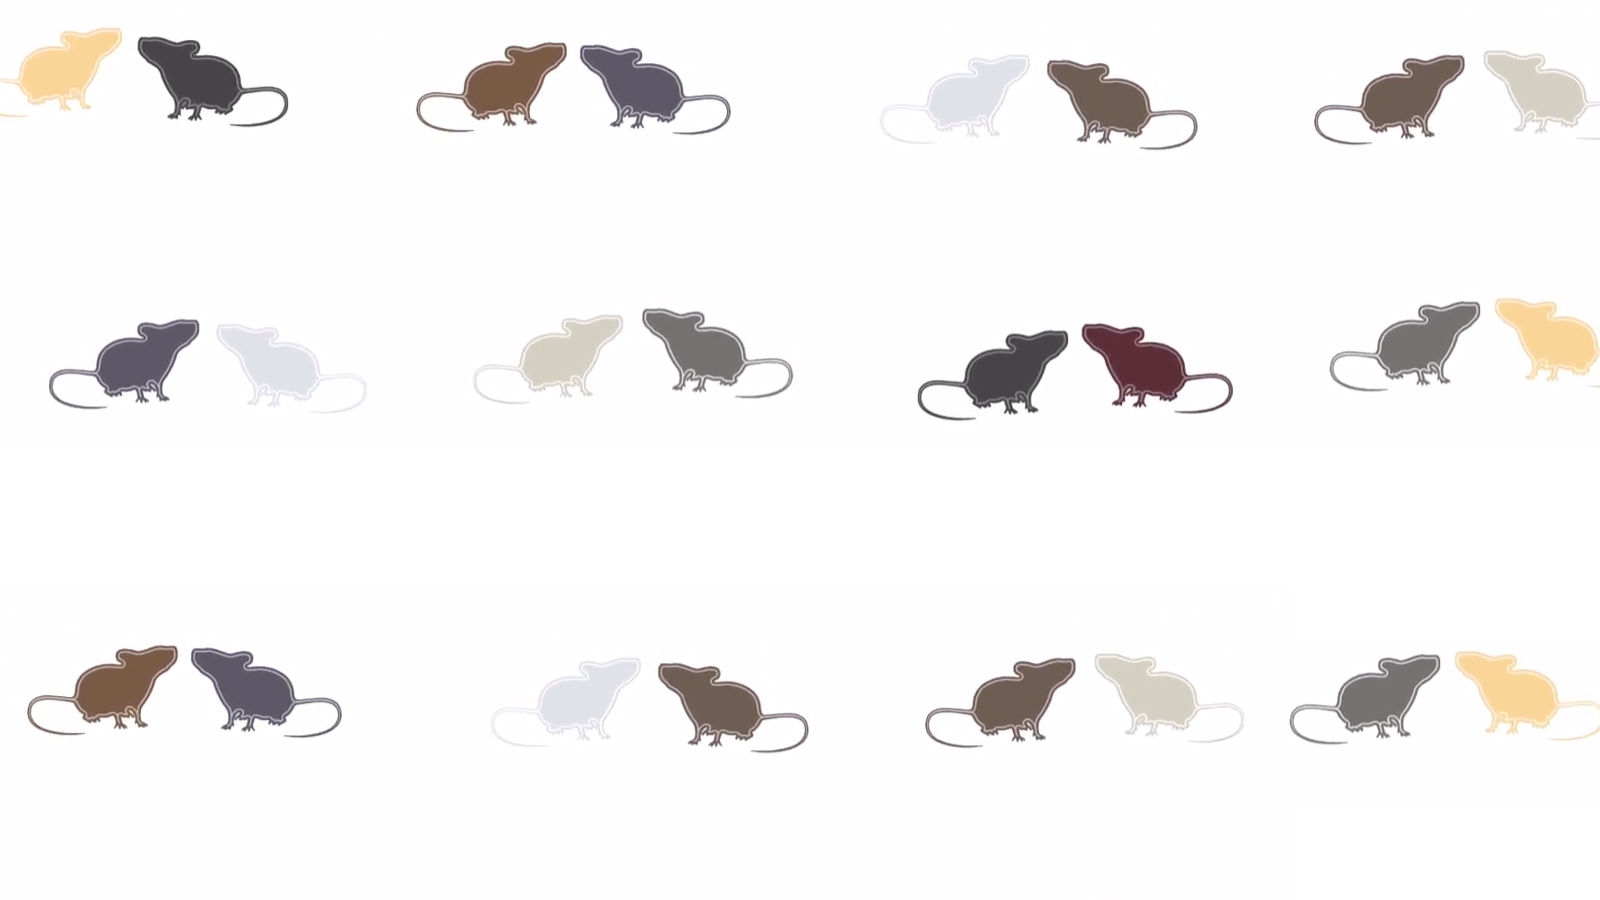 April the how and why of research with diversity mouse strains and populations